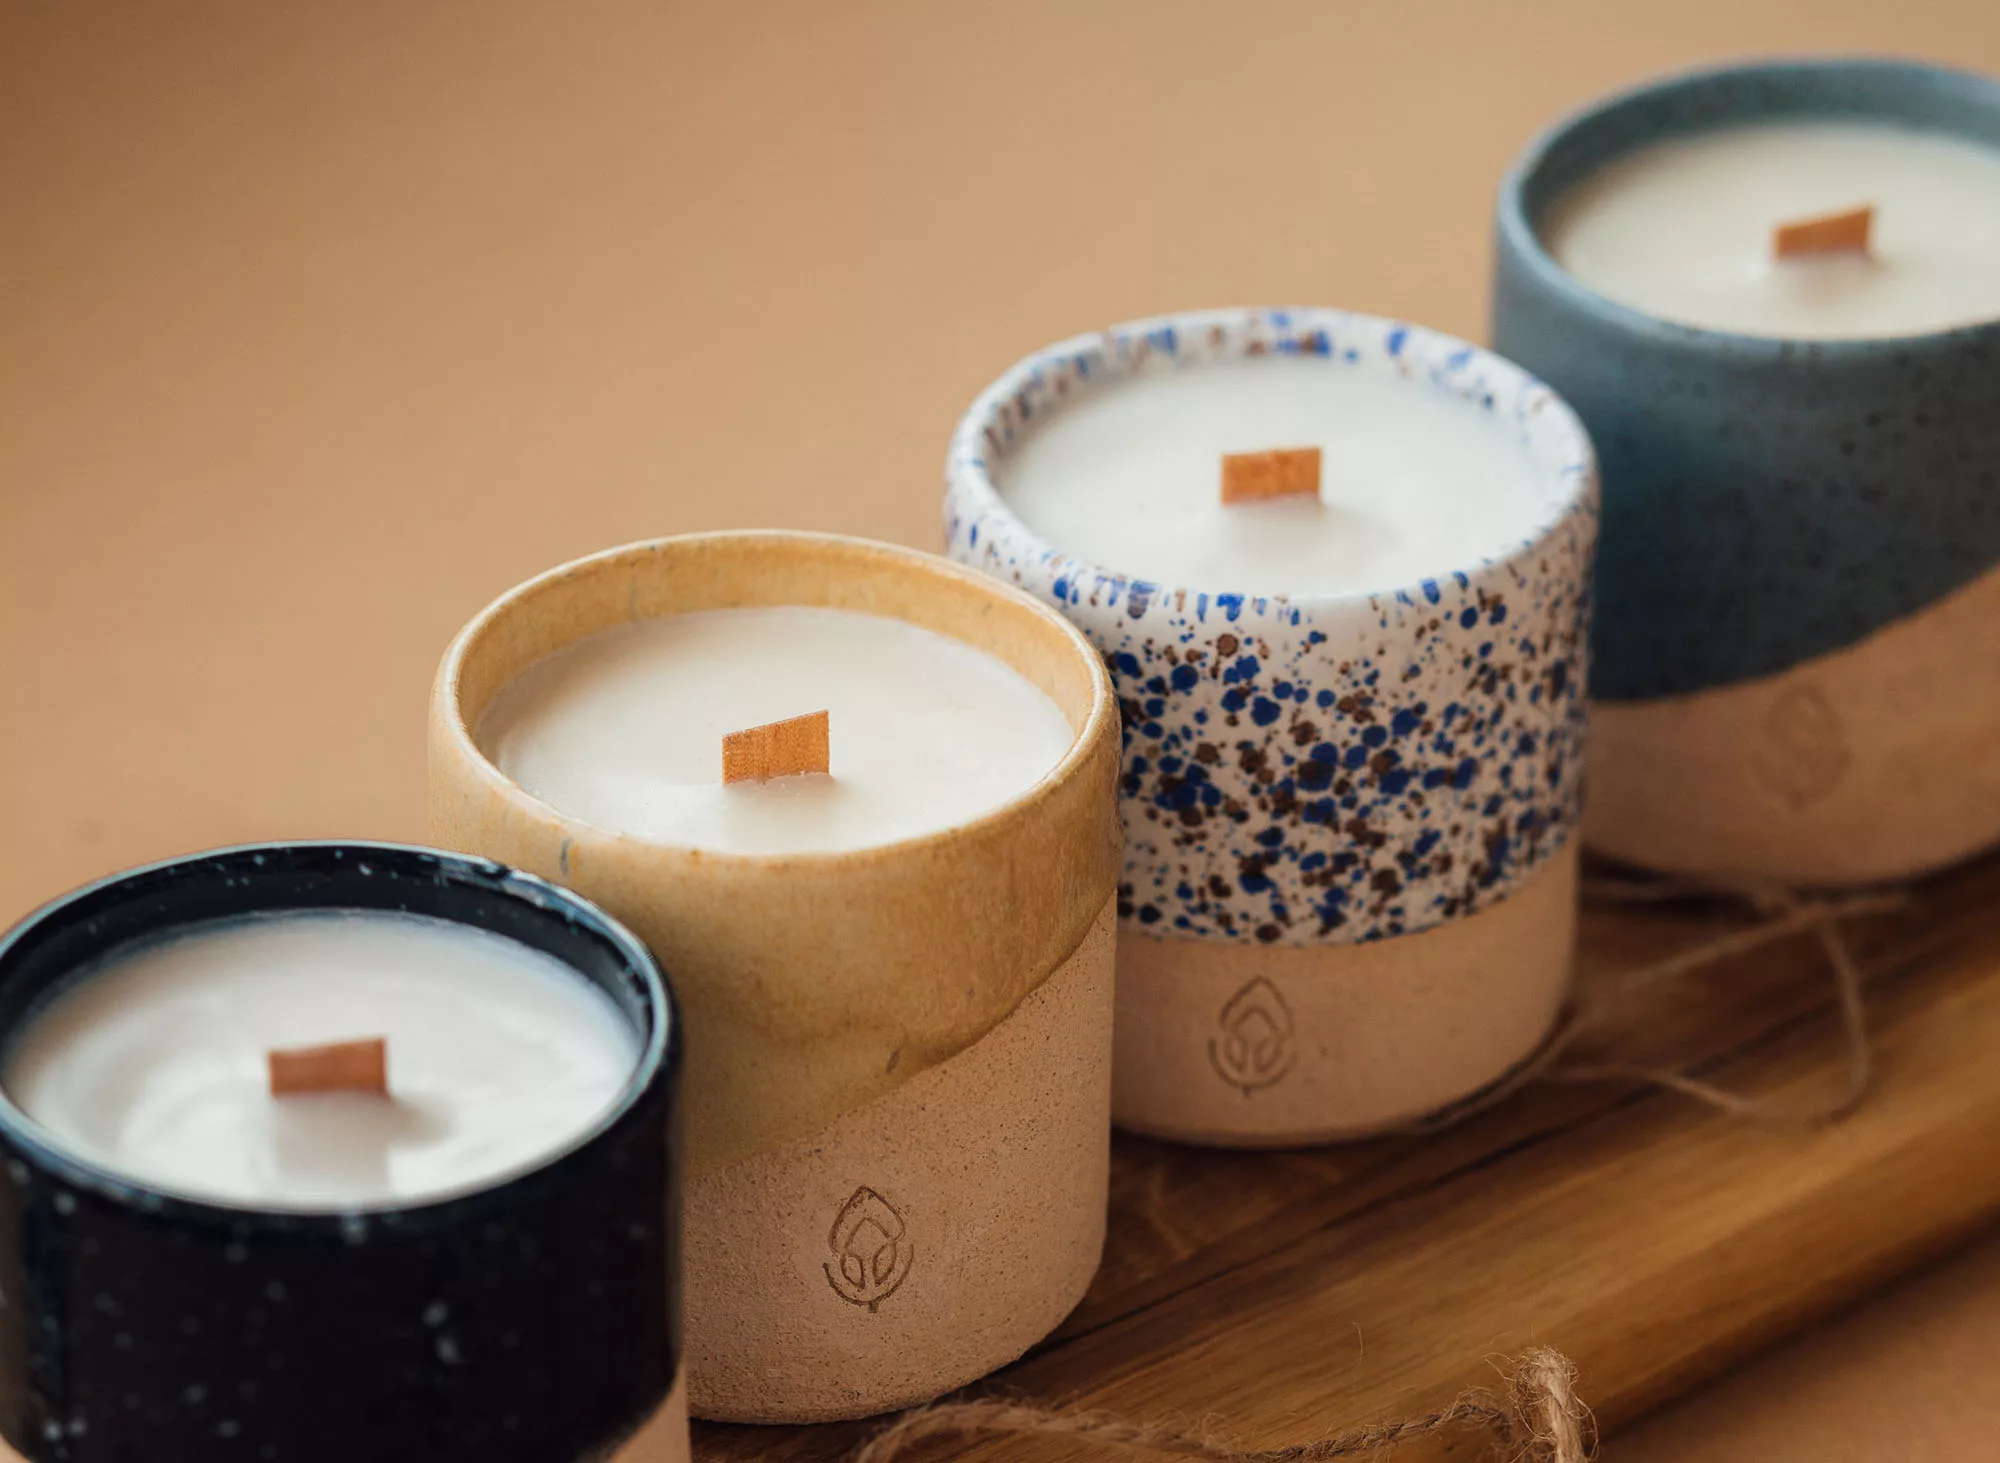 A selection of handmade candles on a wooden base